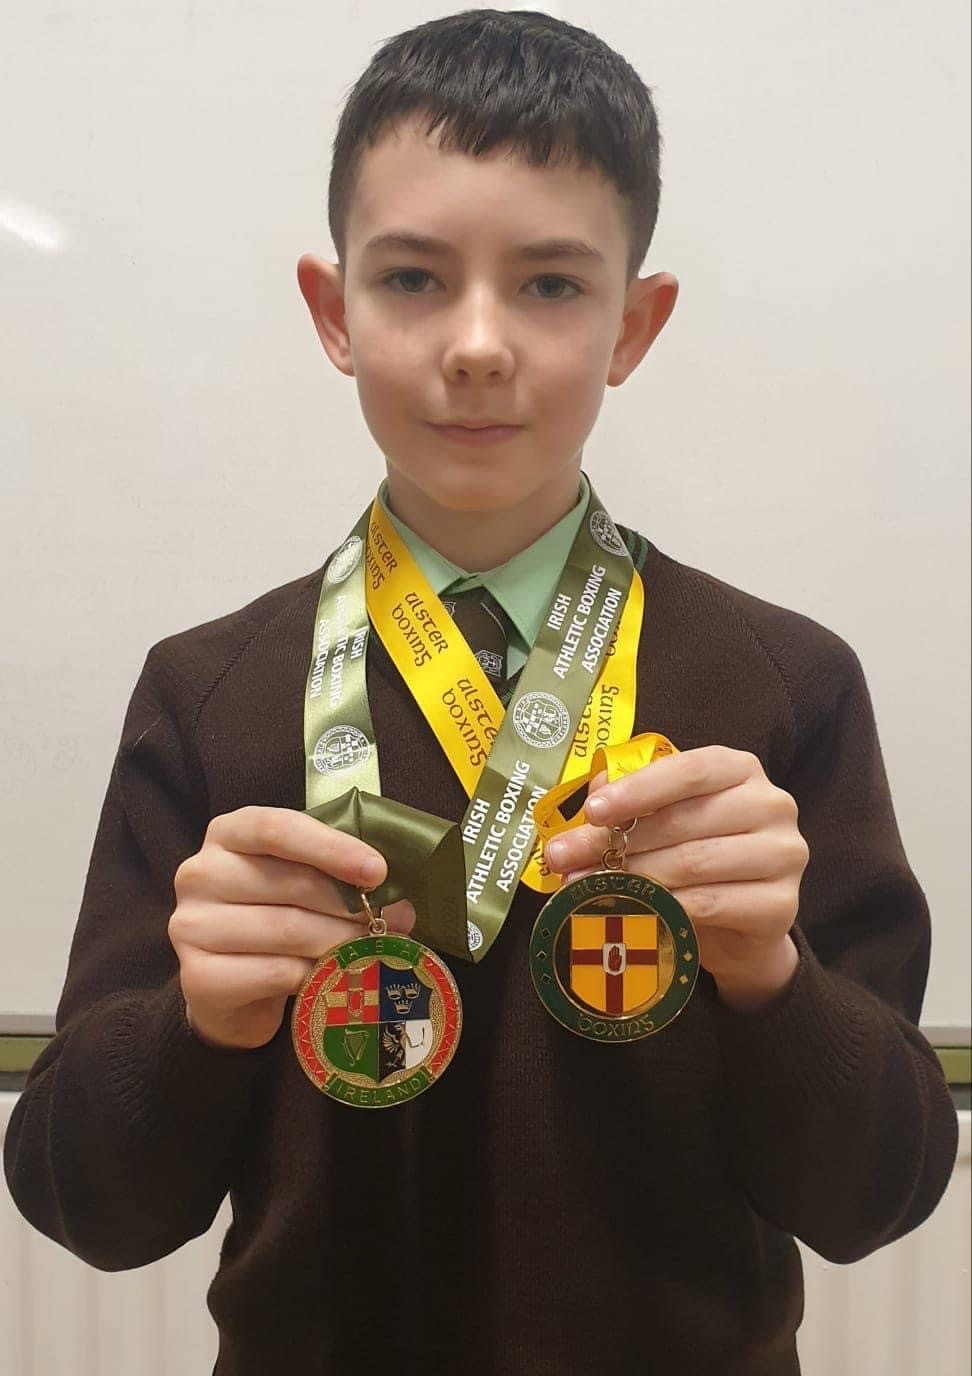 BOXING: Robert Quinn (Year 9) won the Ulster and All-Ireland Boxing Championships for his weight category.